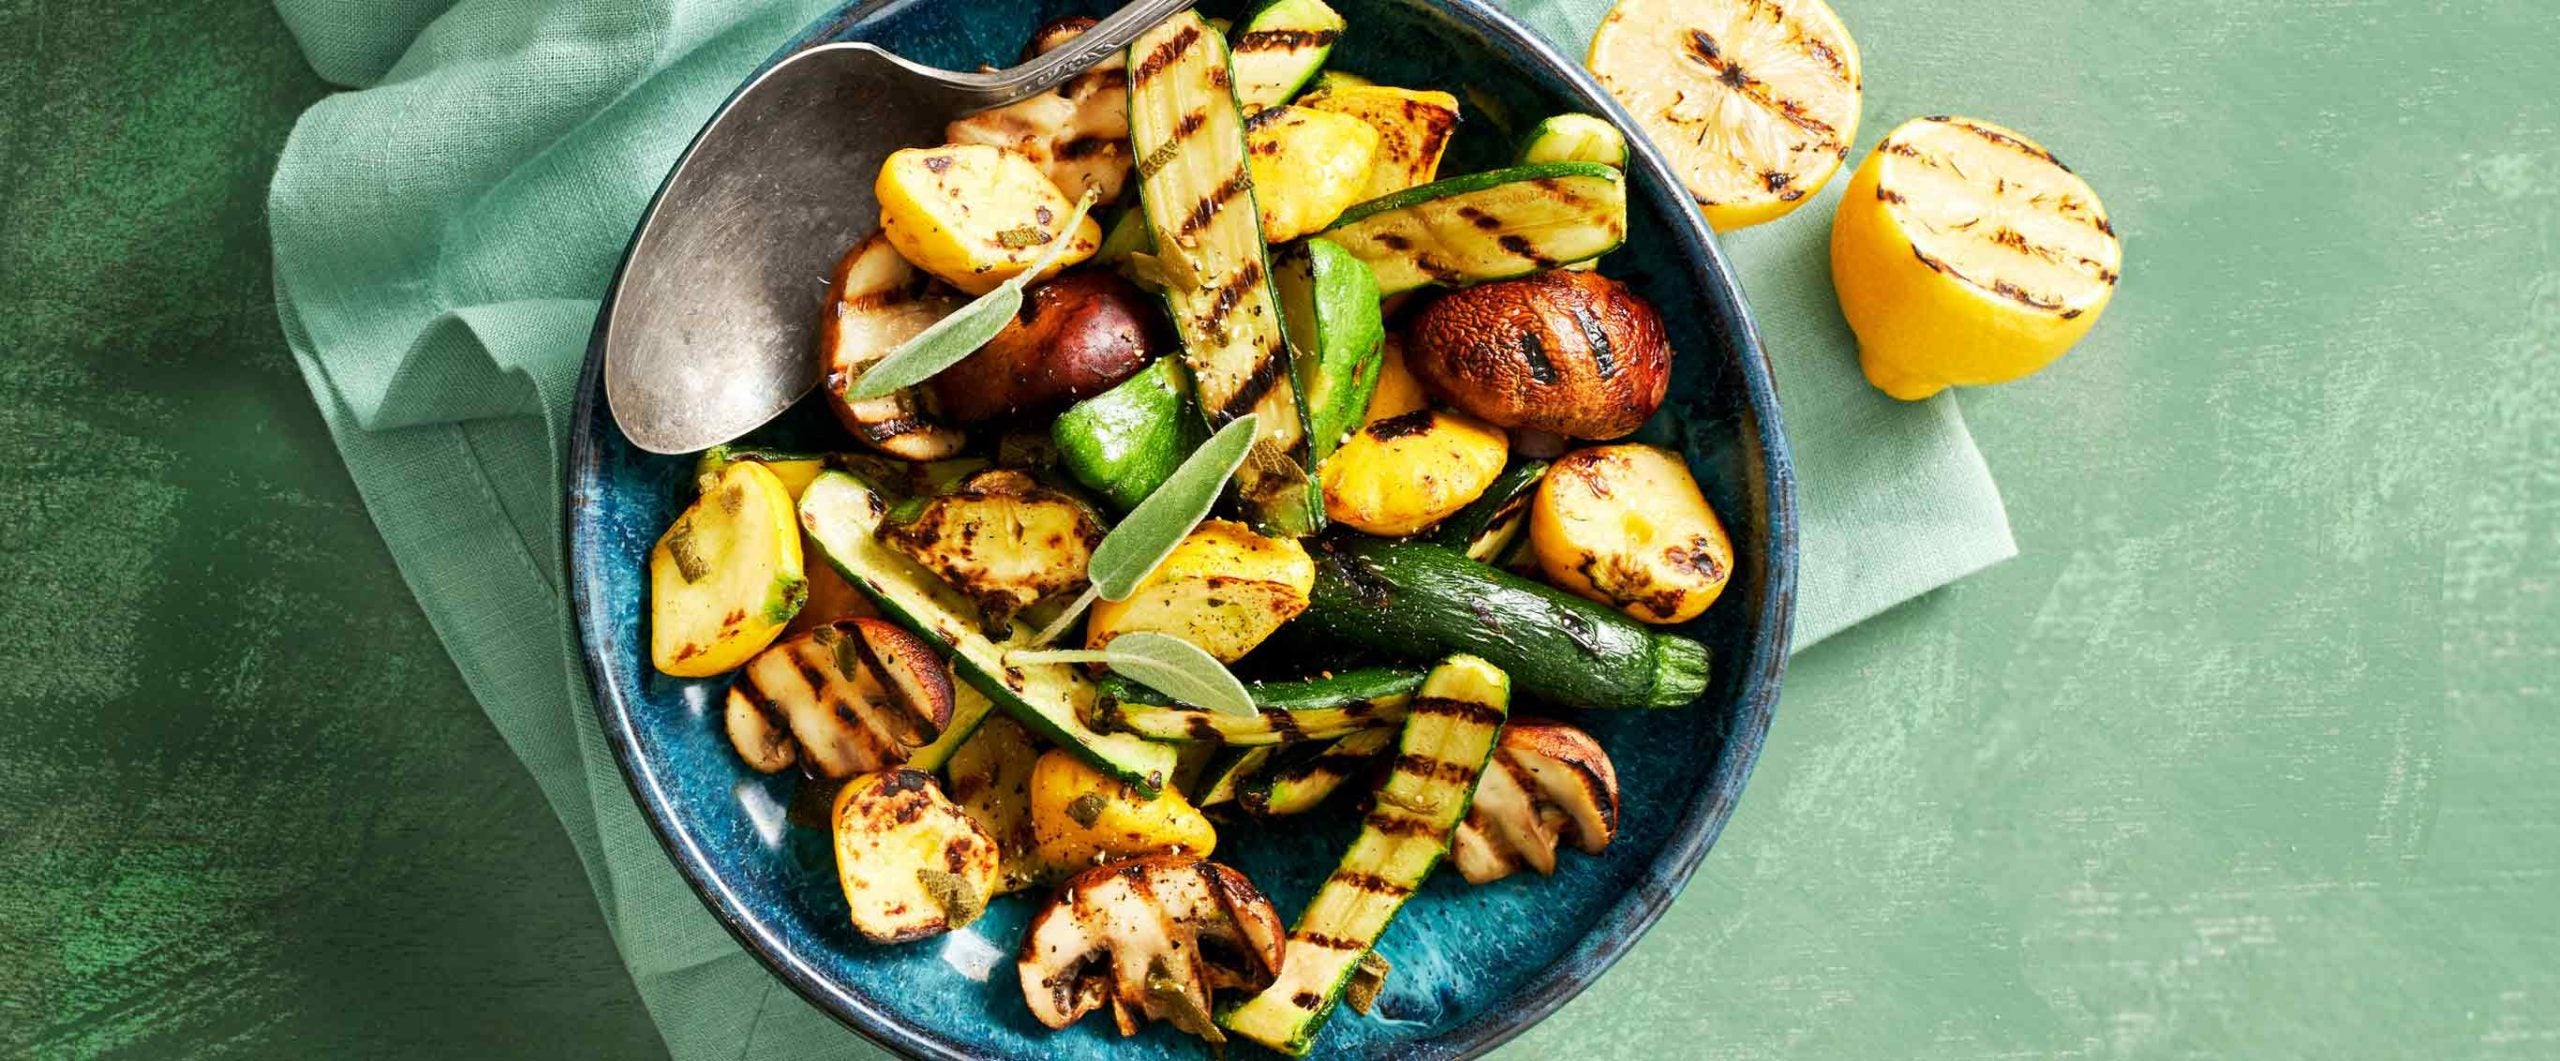 An assortment of grilled zucchini and squash in a blue bowl, with grilled lemon halves off to the side on the table